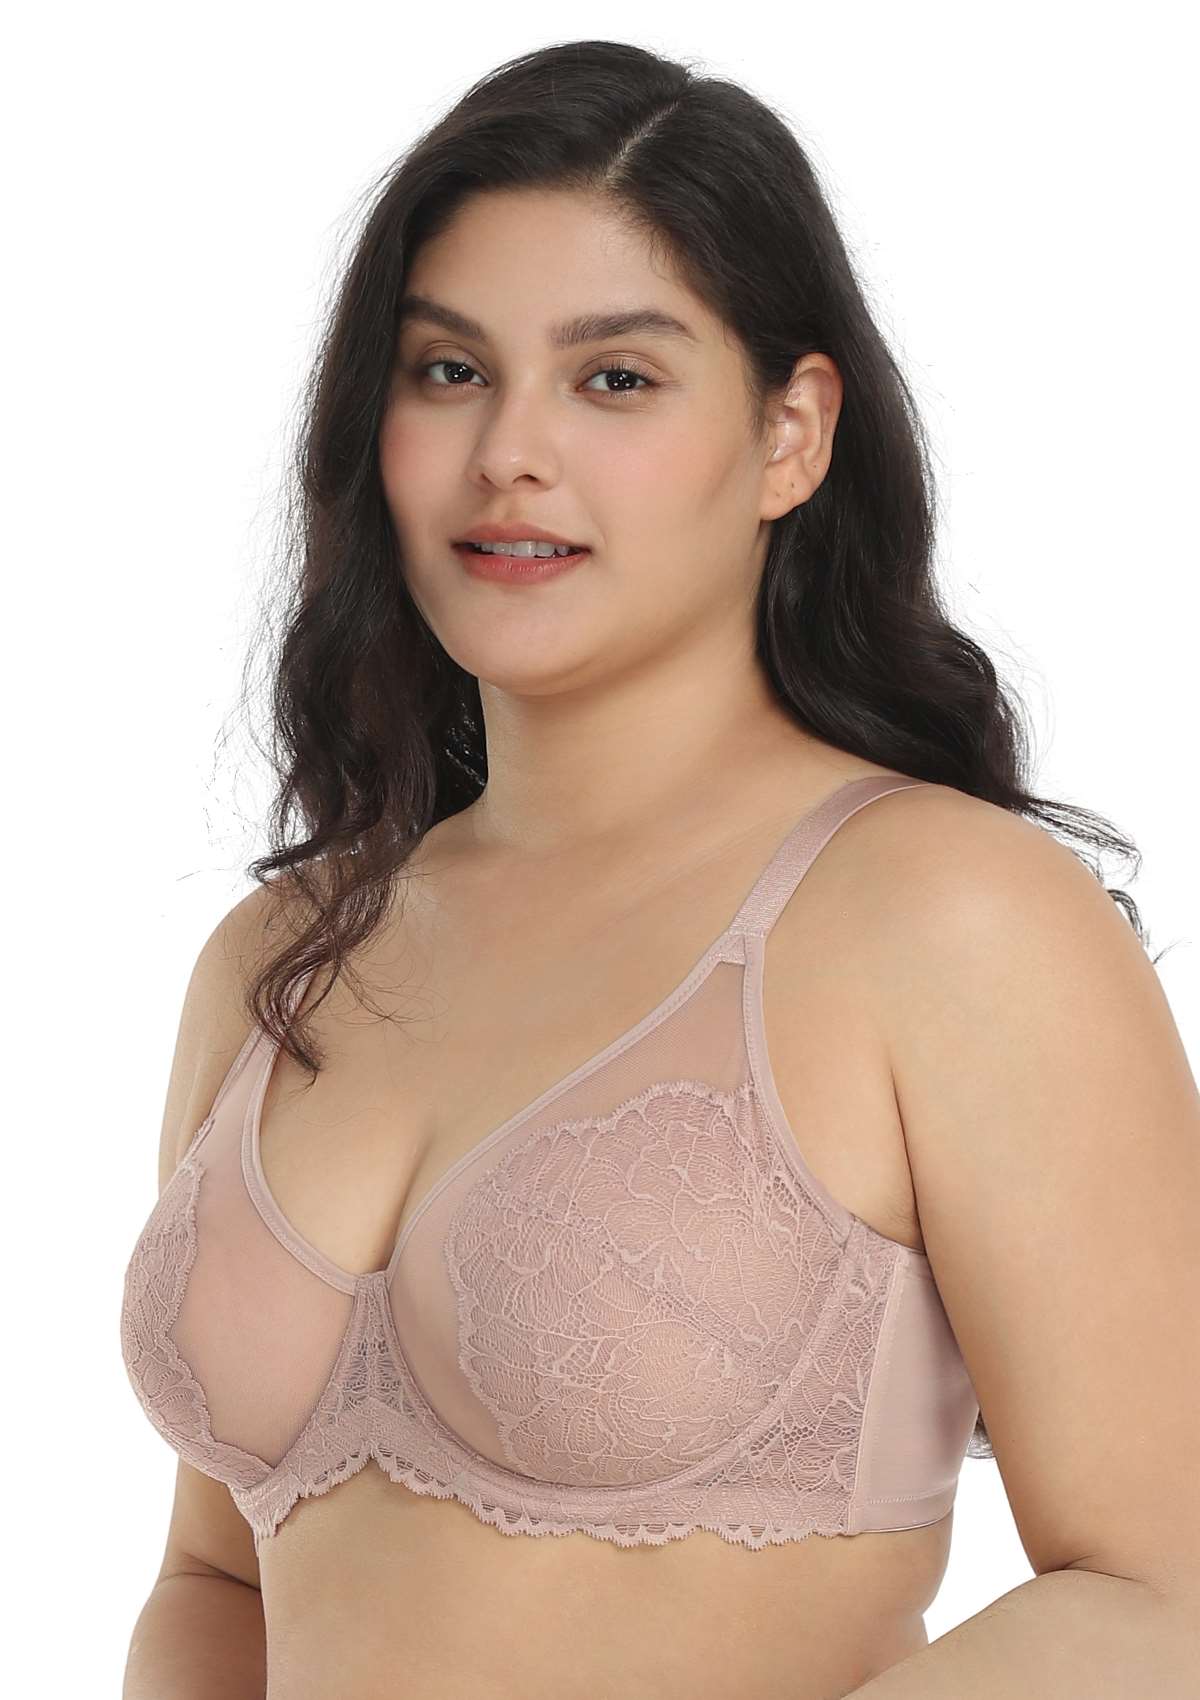 HSIA Blossom Lace Bra And Panties Set: Best Bra For Large Busts - Dark Pink / 44 / C